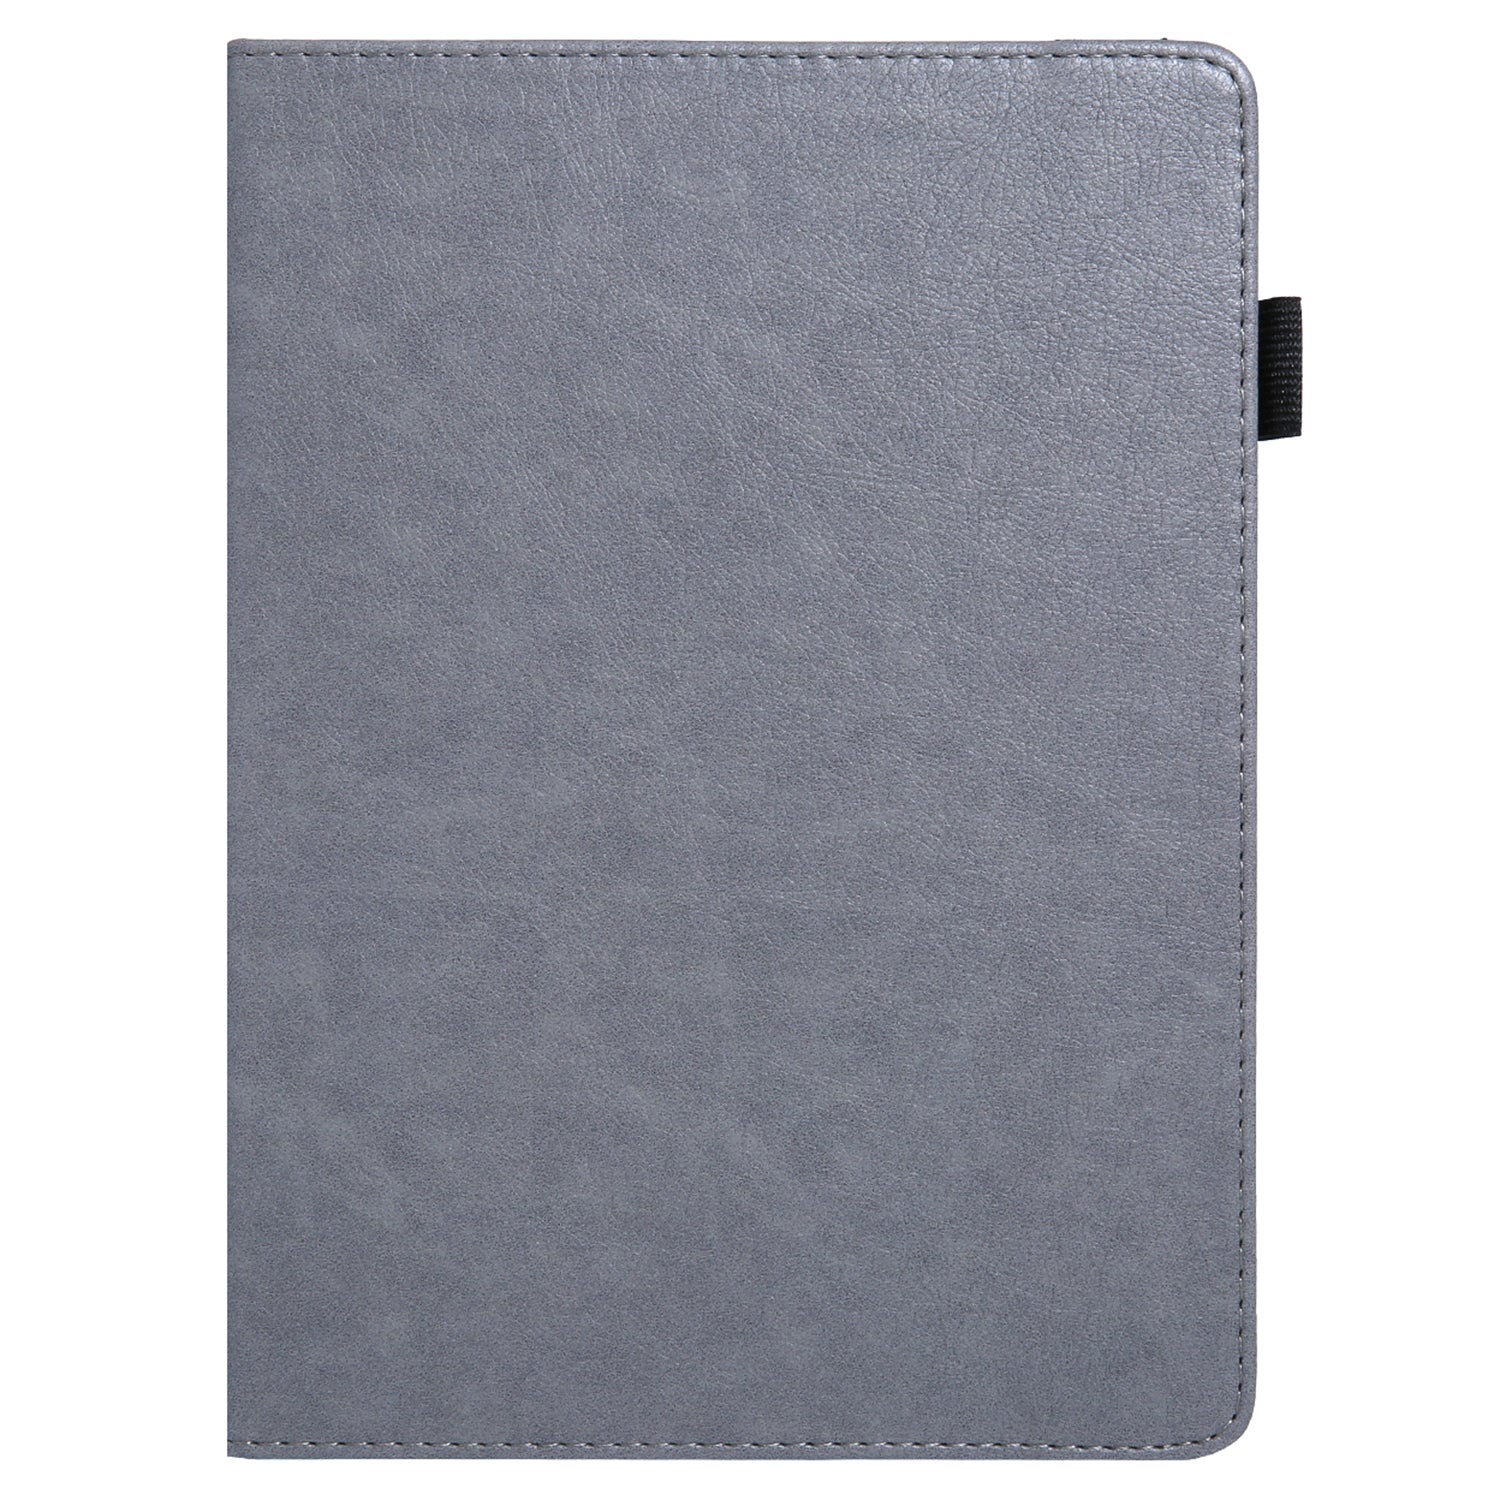 10-inch Tablet Case Card Slots PU Leather Flip Cover with Folding Stand - Grey